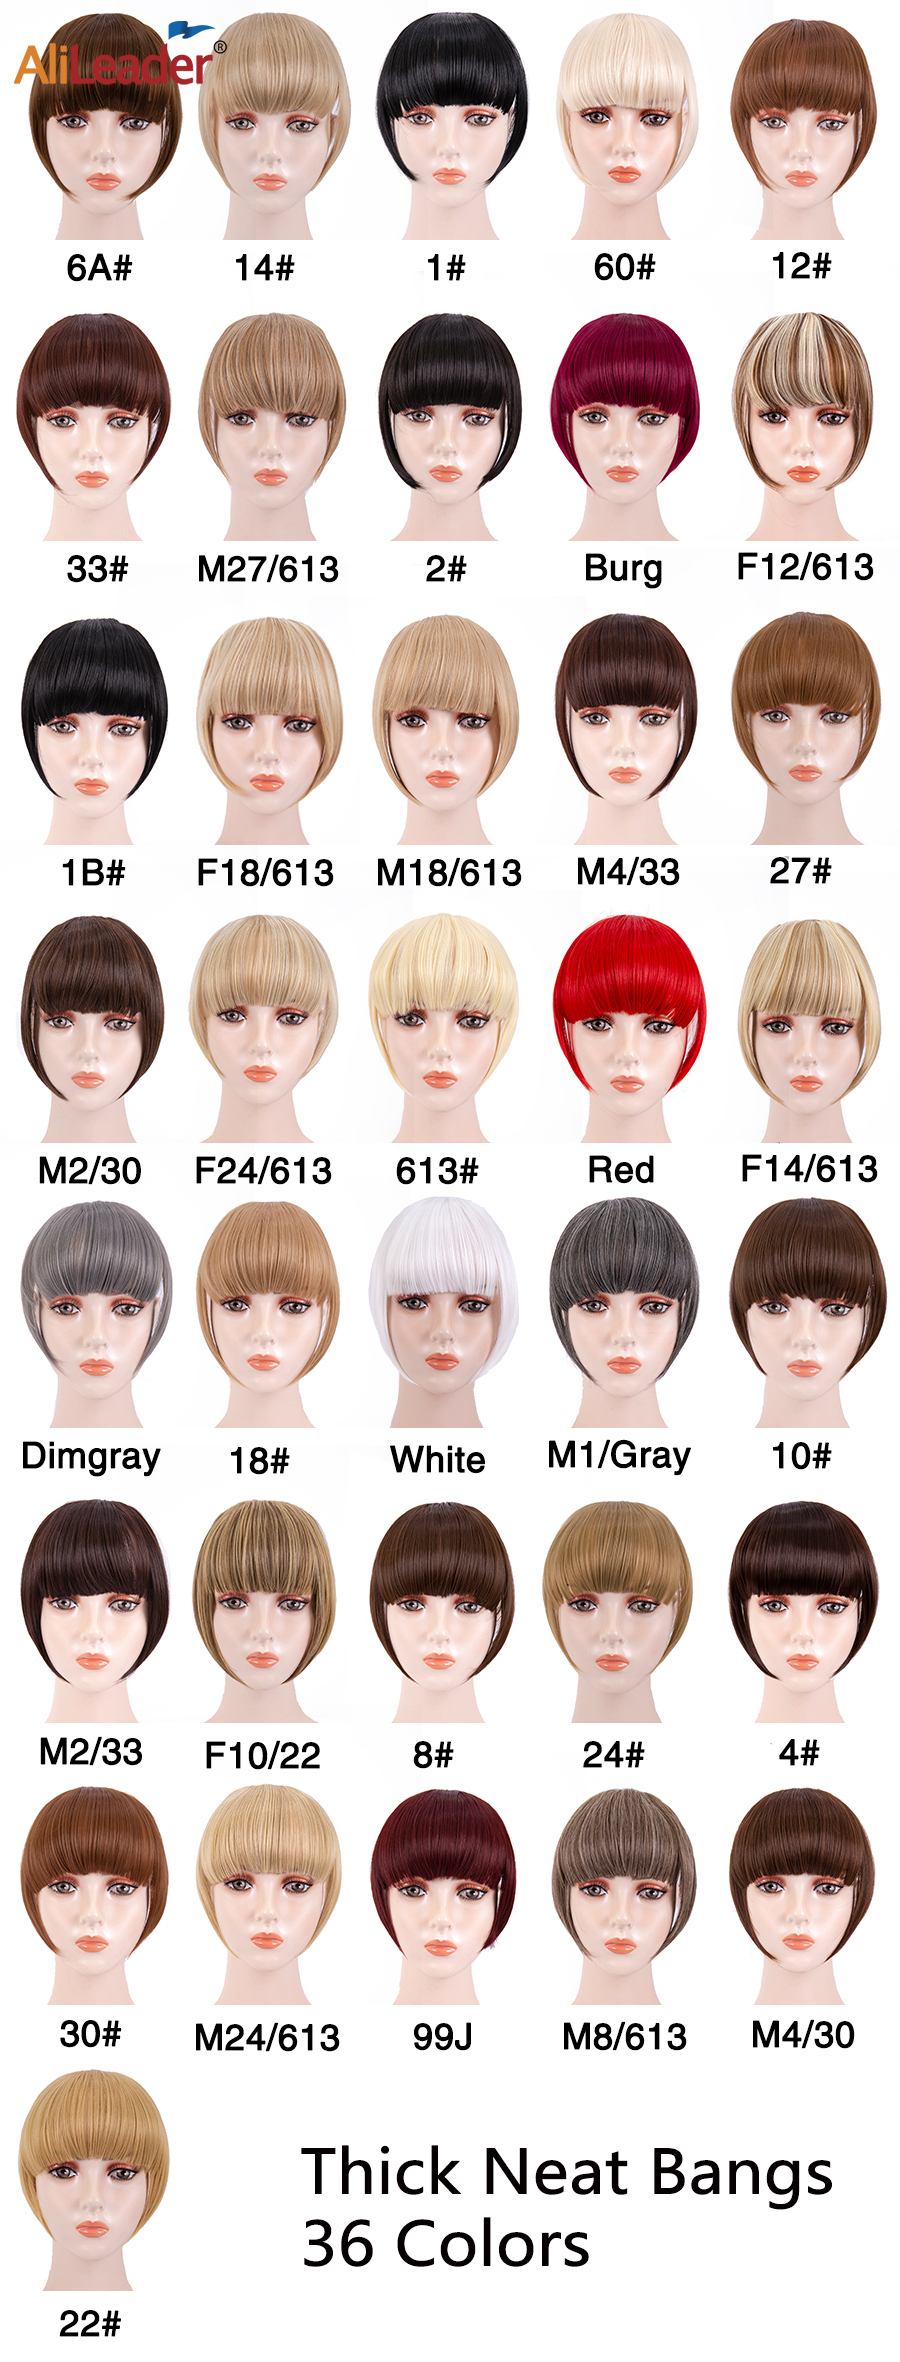 Front Neat Bangs 20